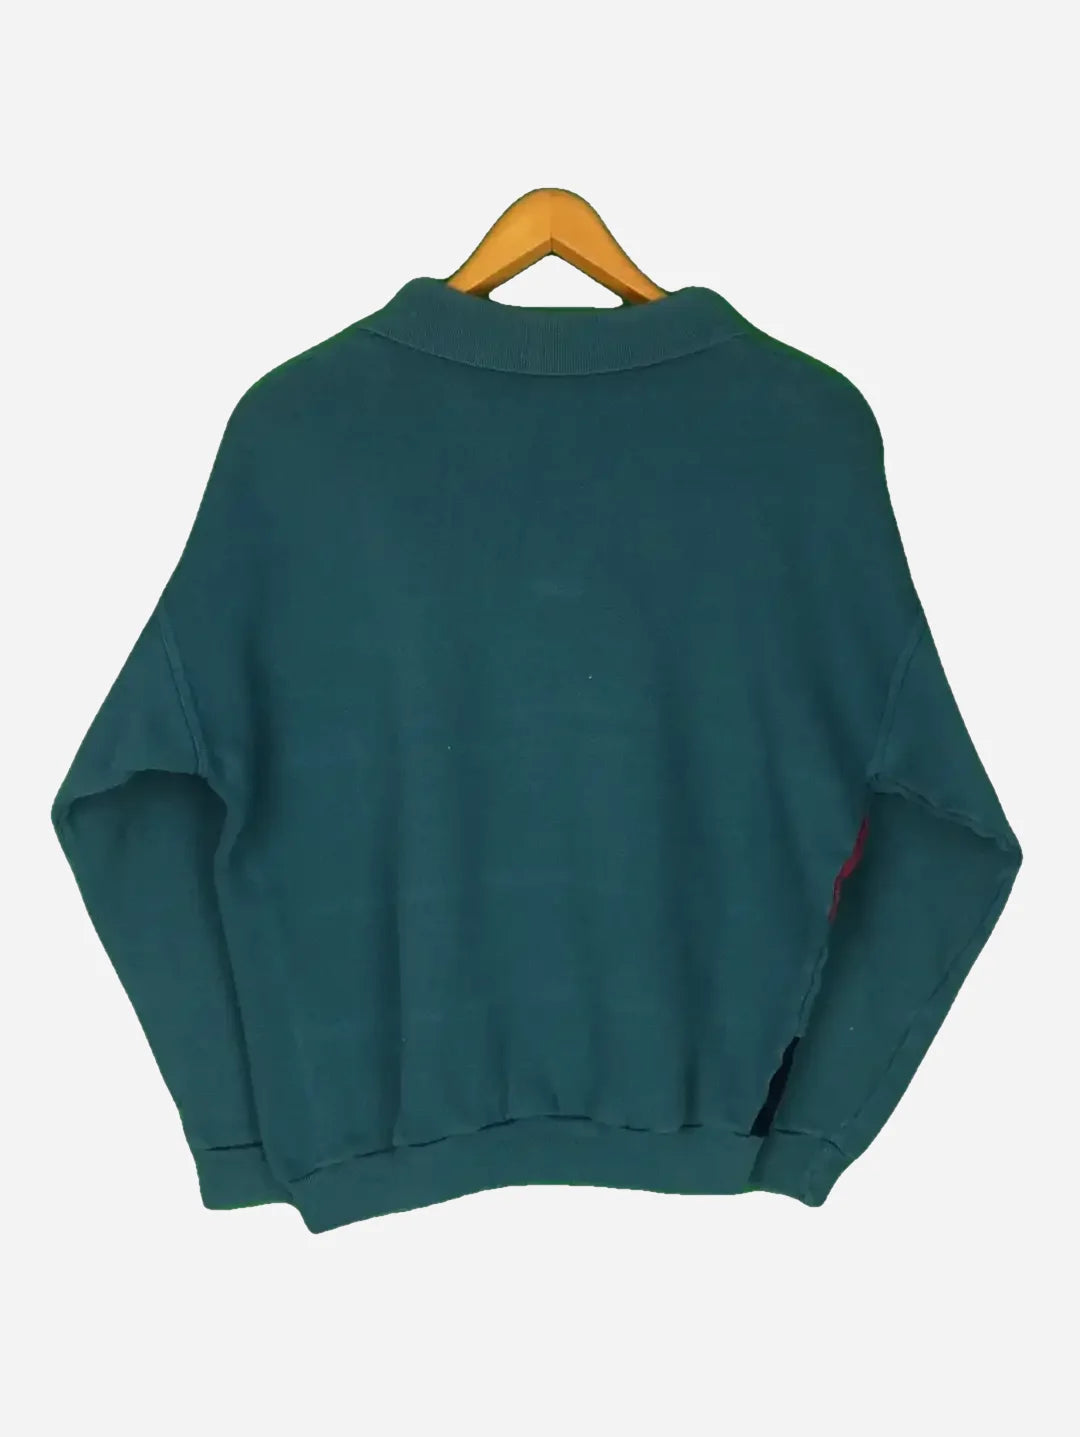 Fred Perry Sweater (S)